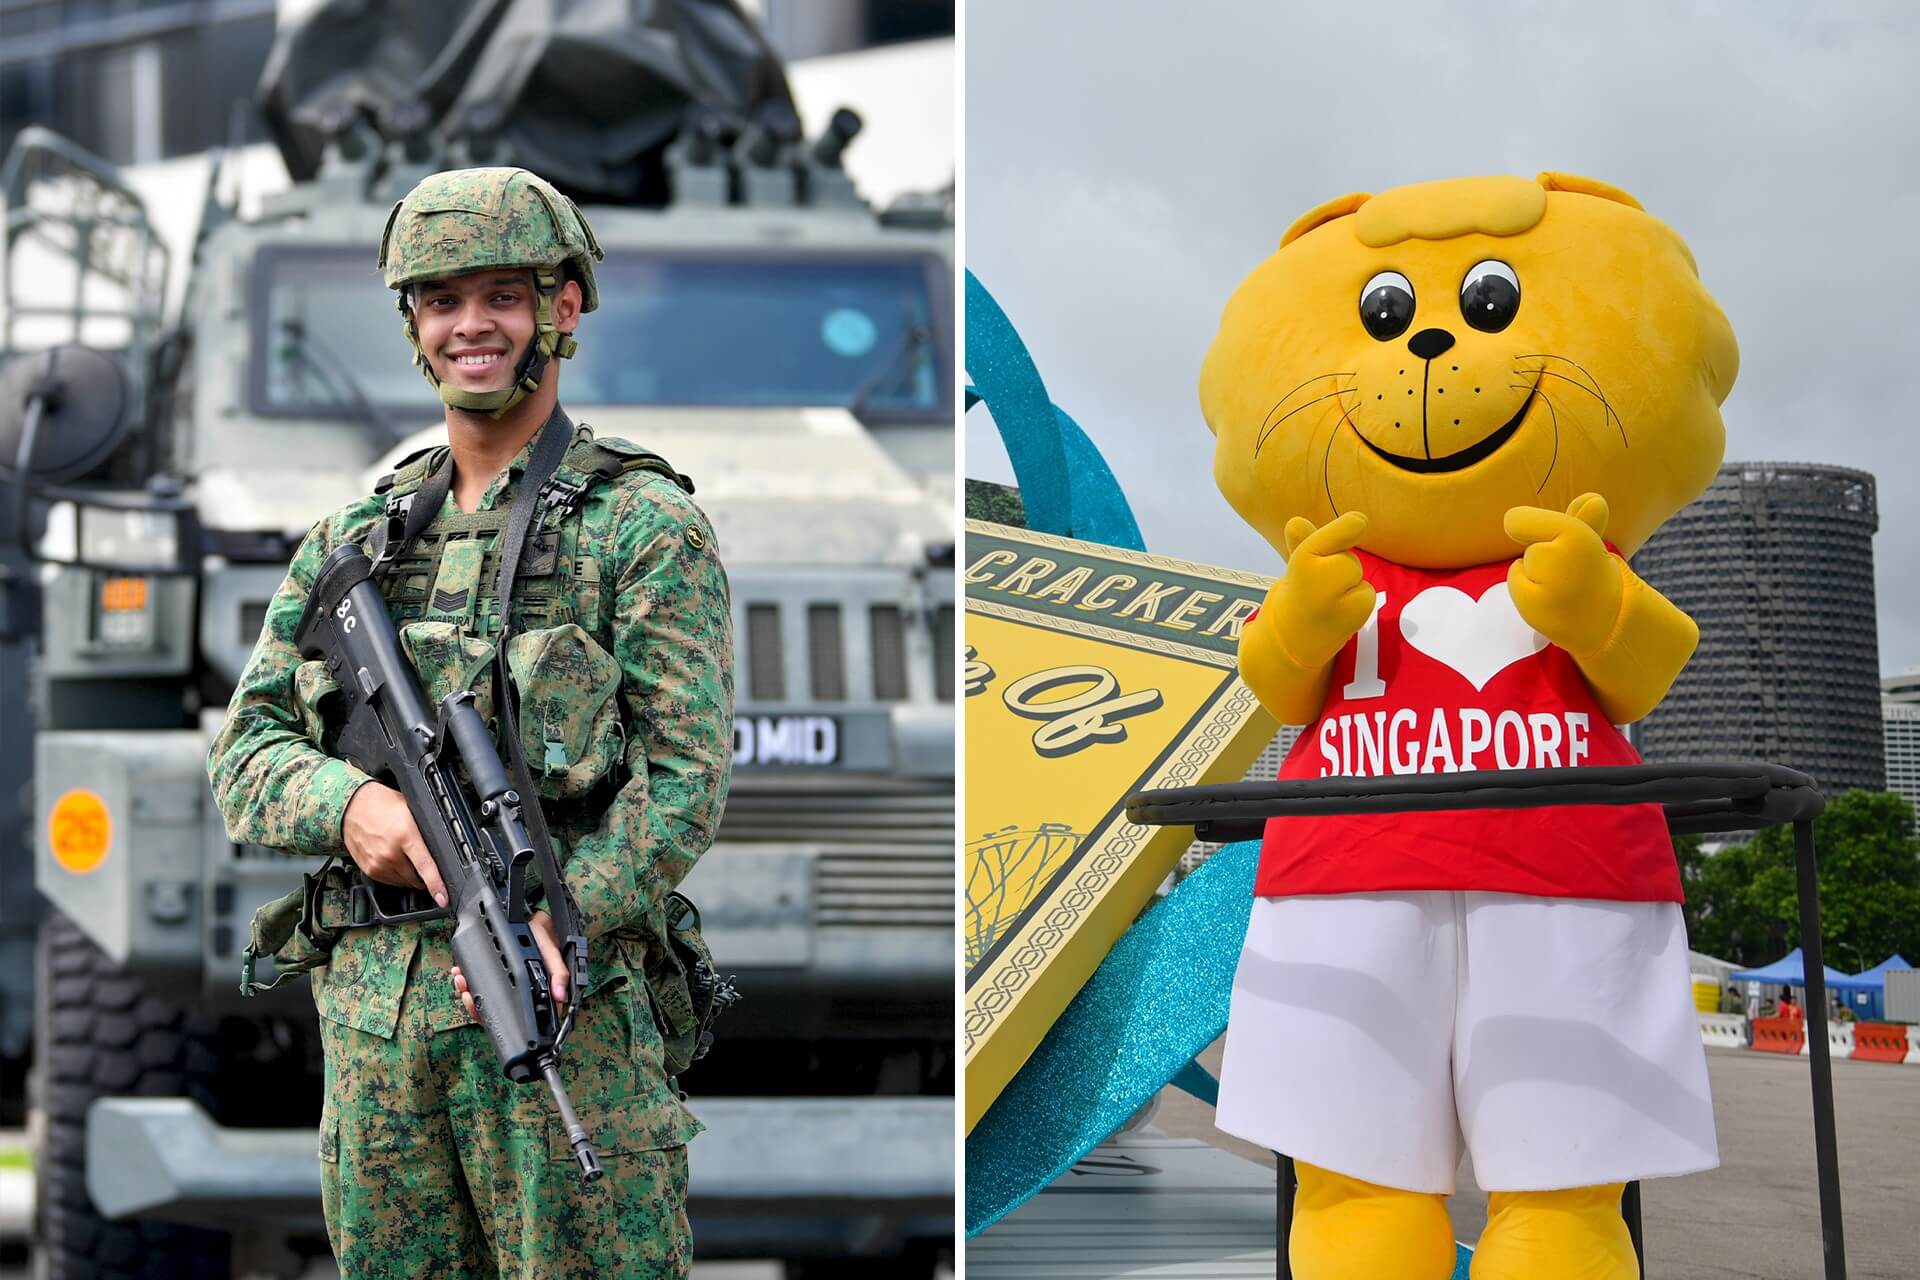 Who is Singa? The man behind the mascot